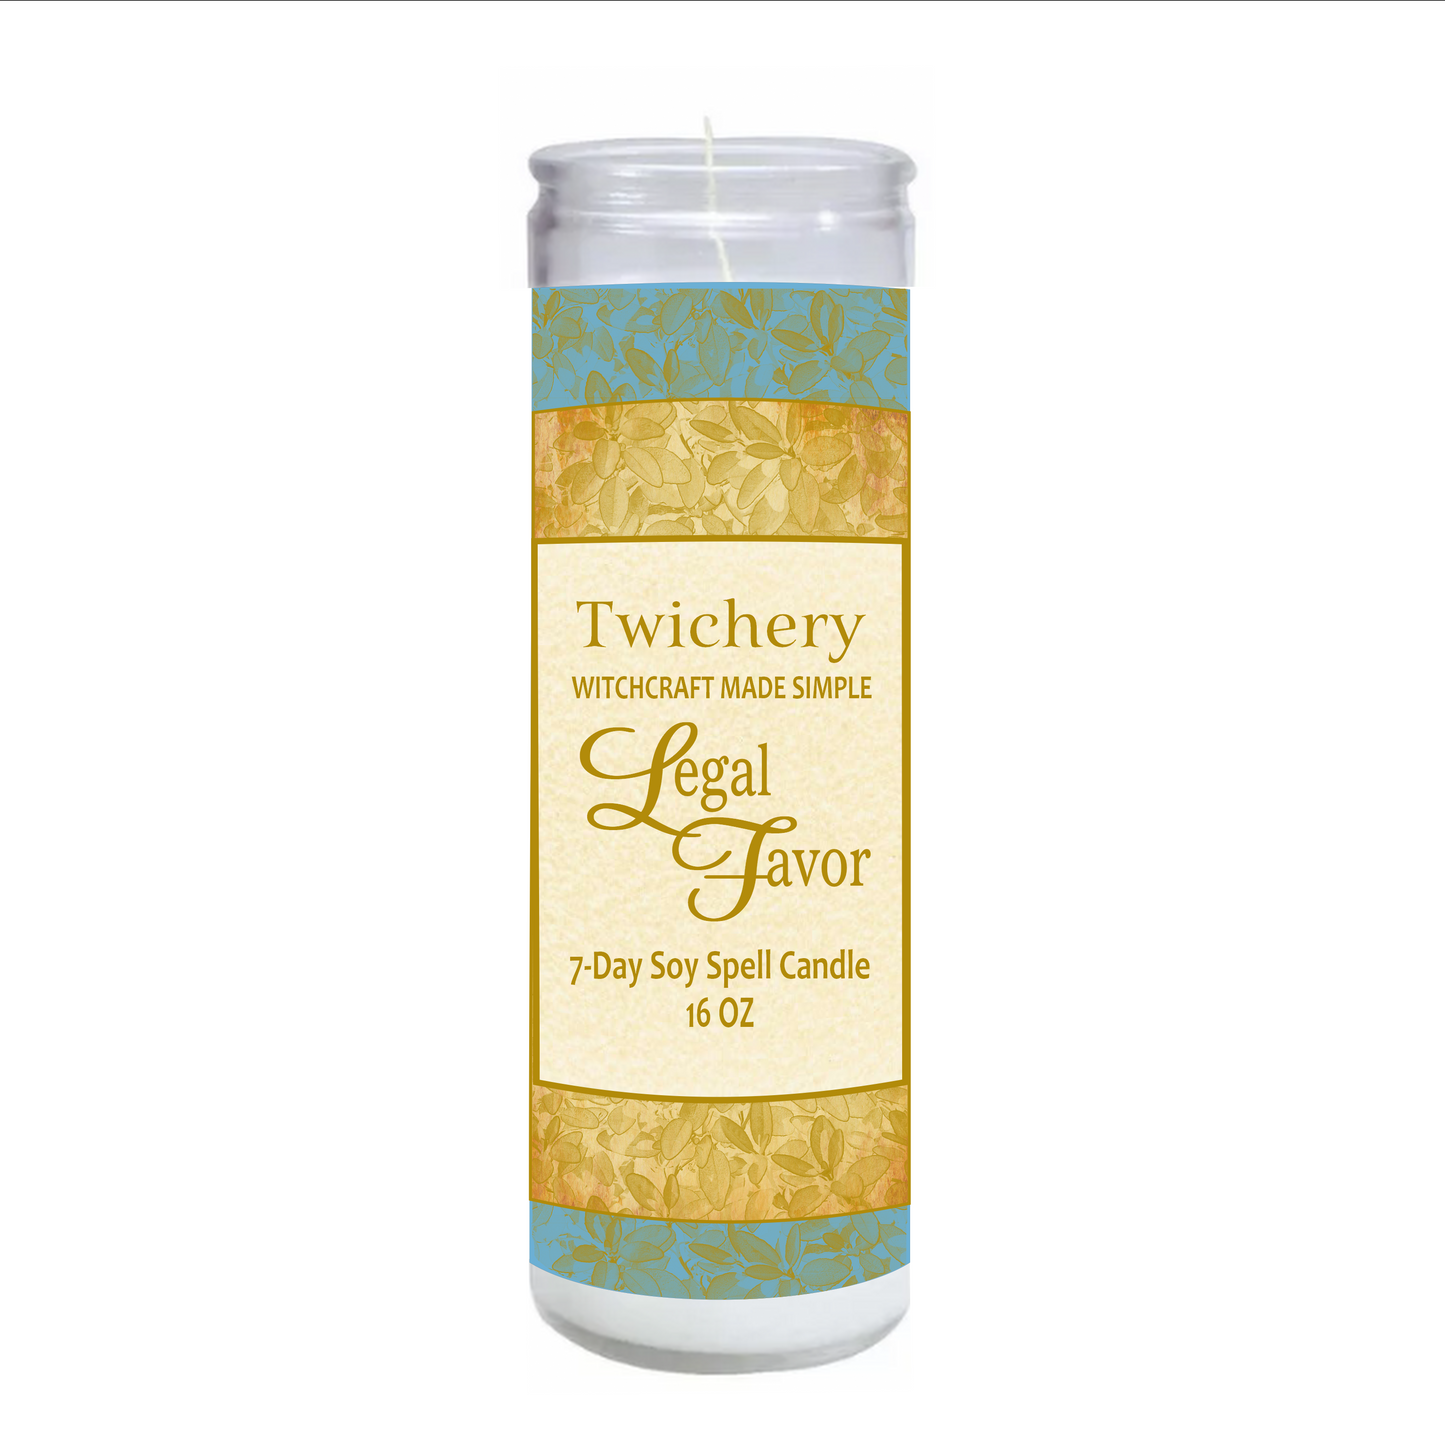 Legal Favor 7-Day Spell Candle